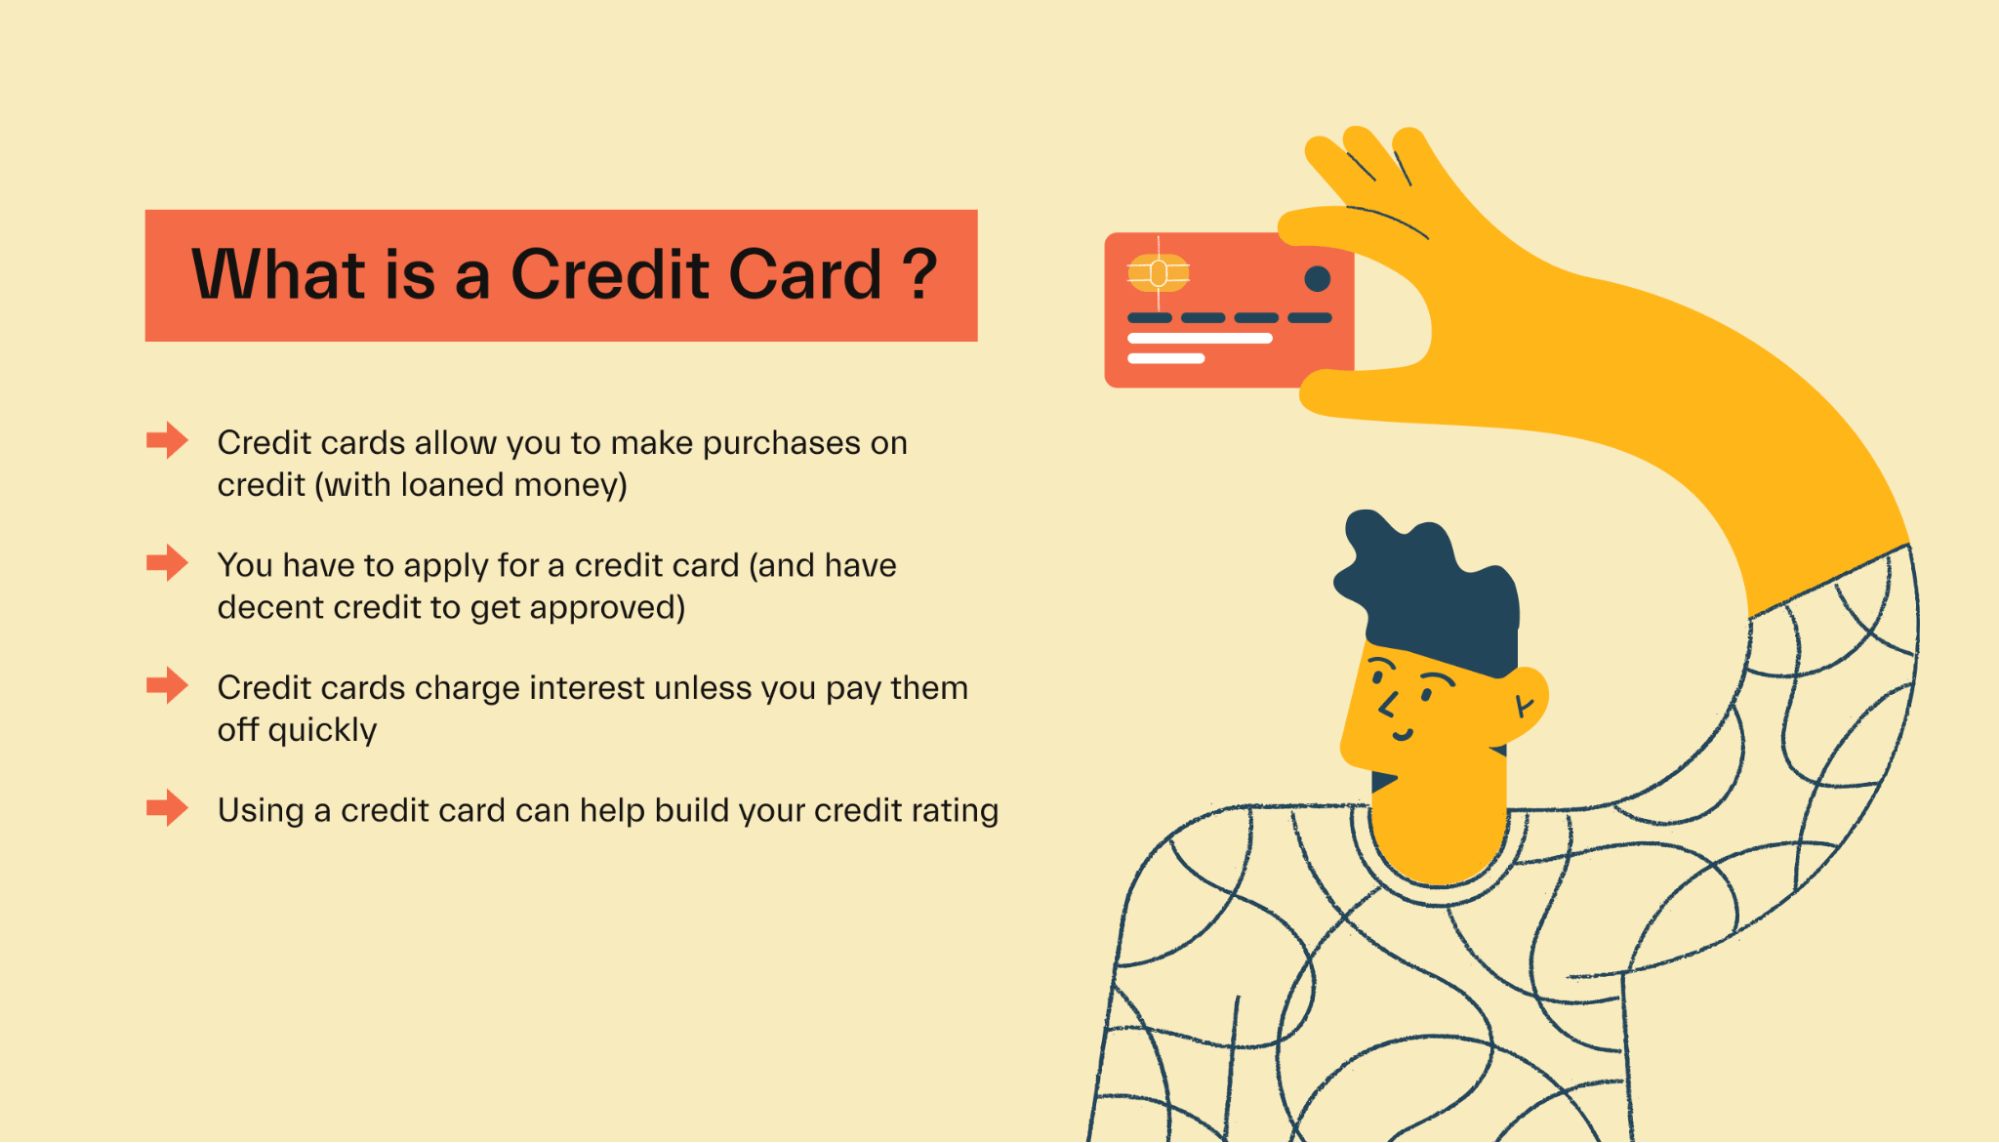 What is a credit card